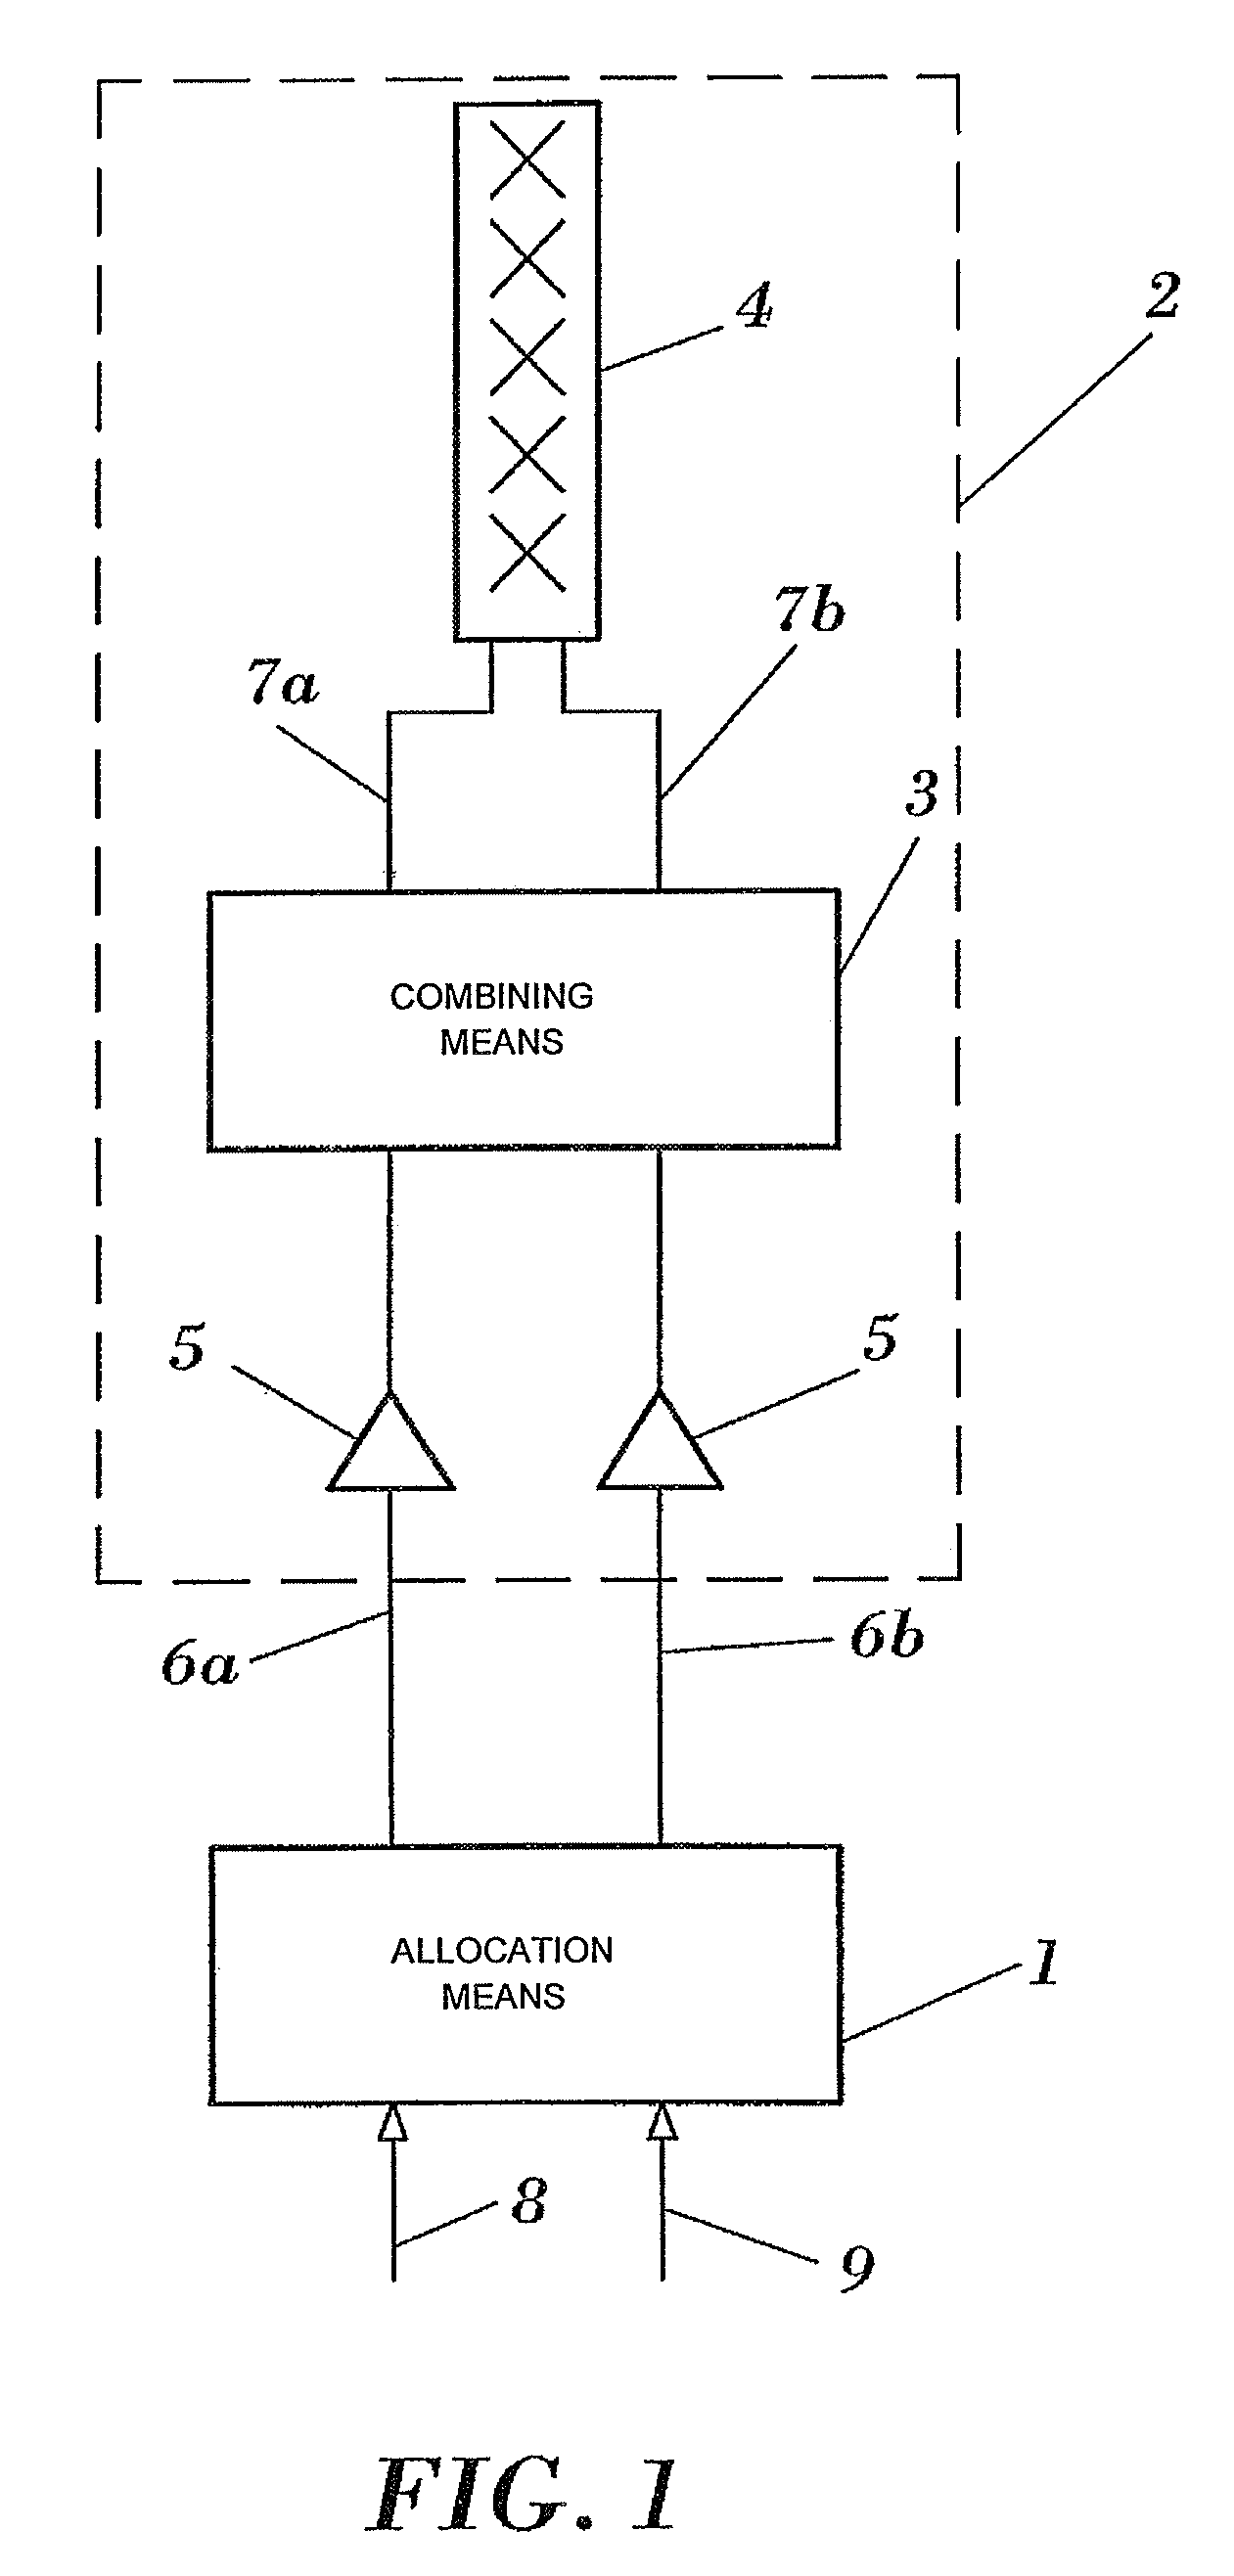 Data transmission in a wide area mobile network